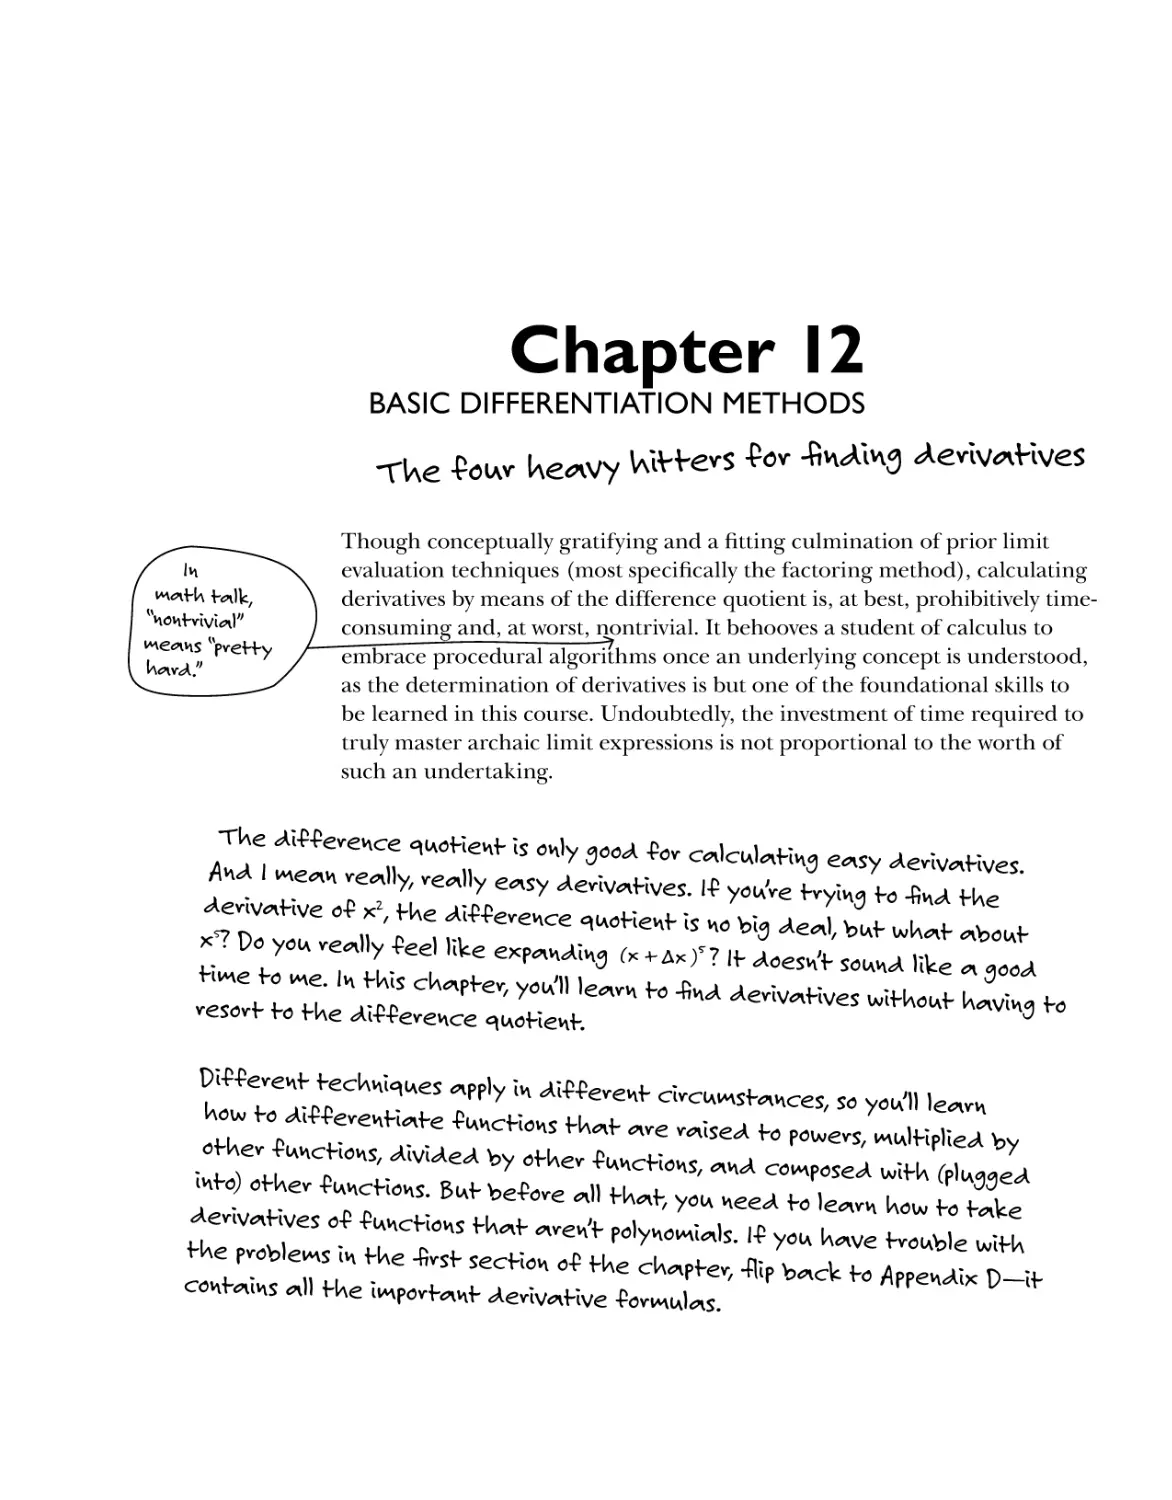 Chapter 12: Basic Differentiation Methods 169